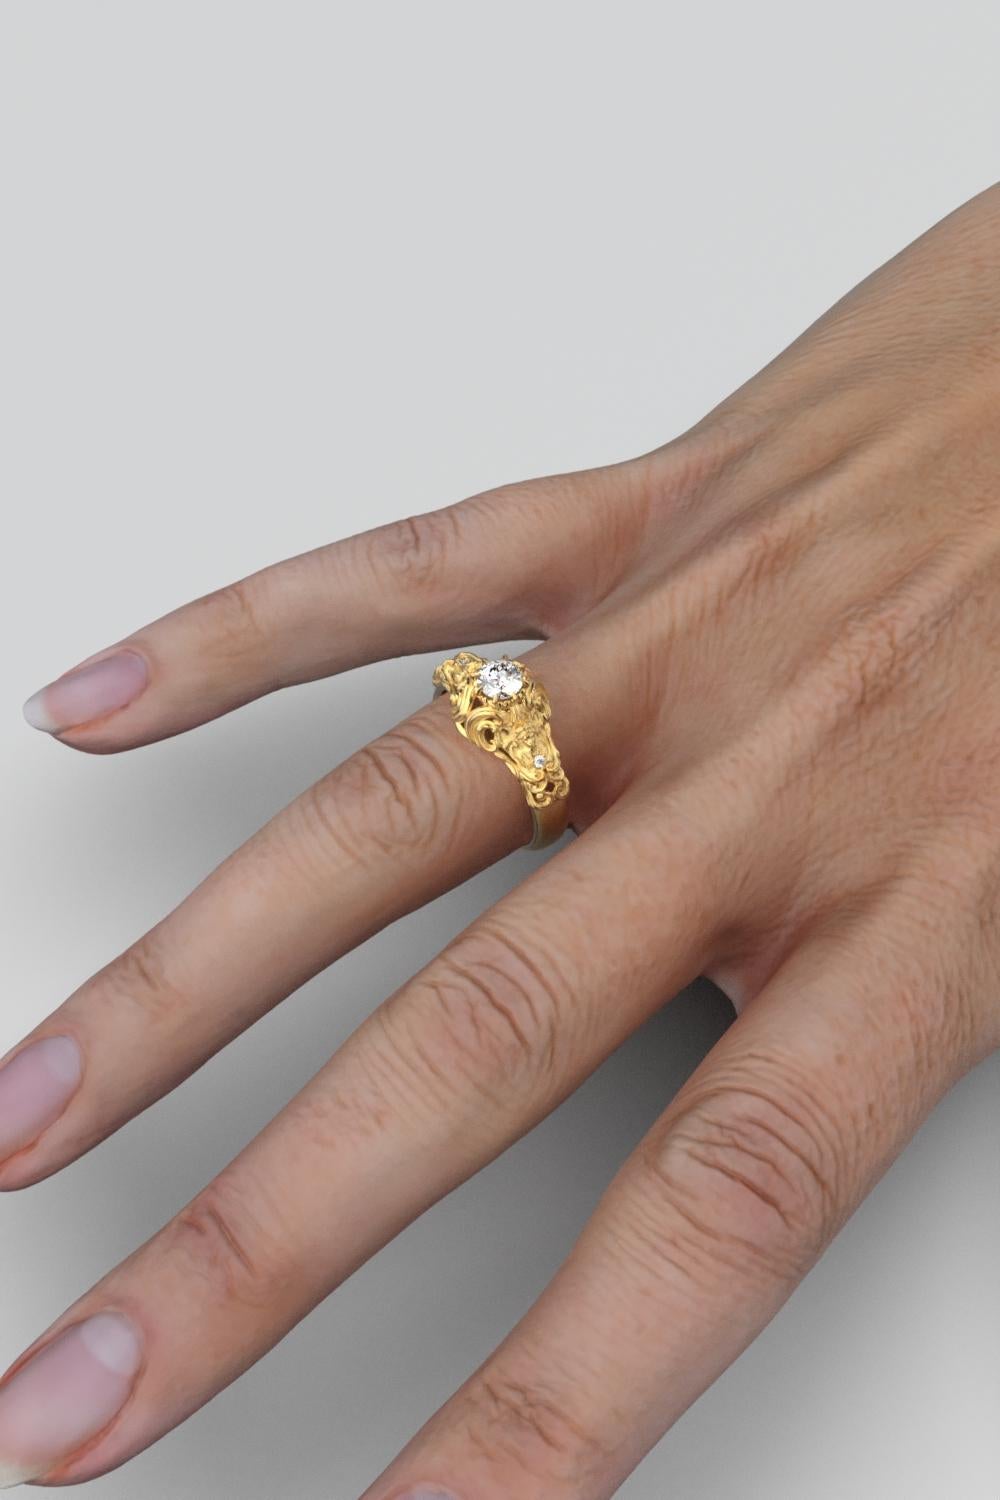 For Sale:  14k Gold Diamond Ring by Oltremare Gioielli in Italian Renaissance Style 4